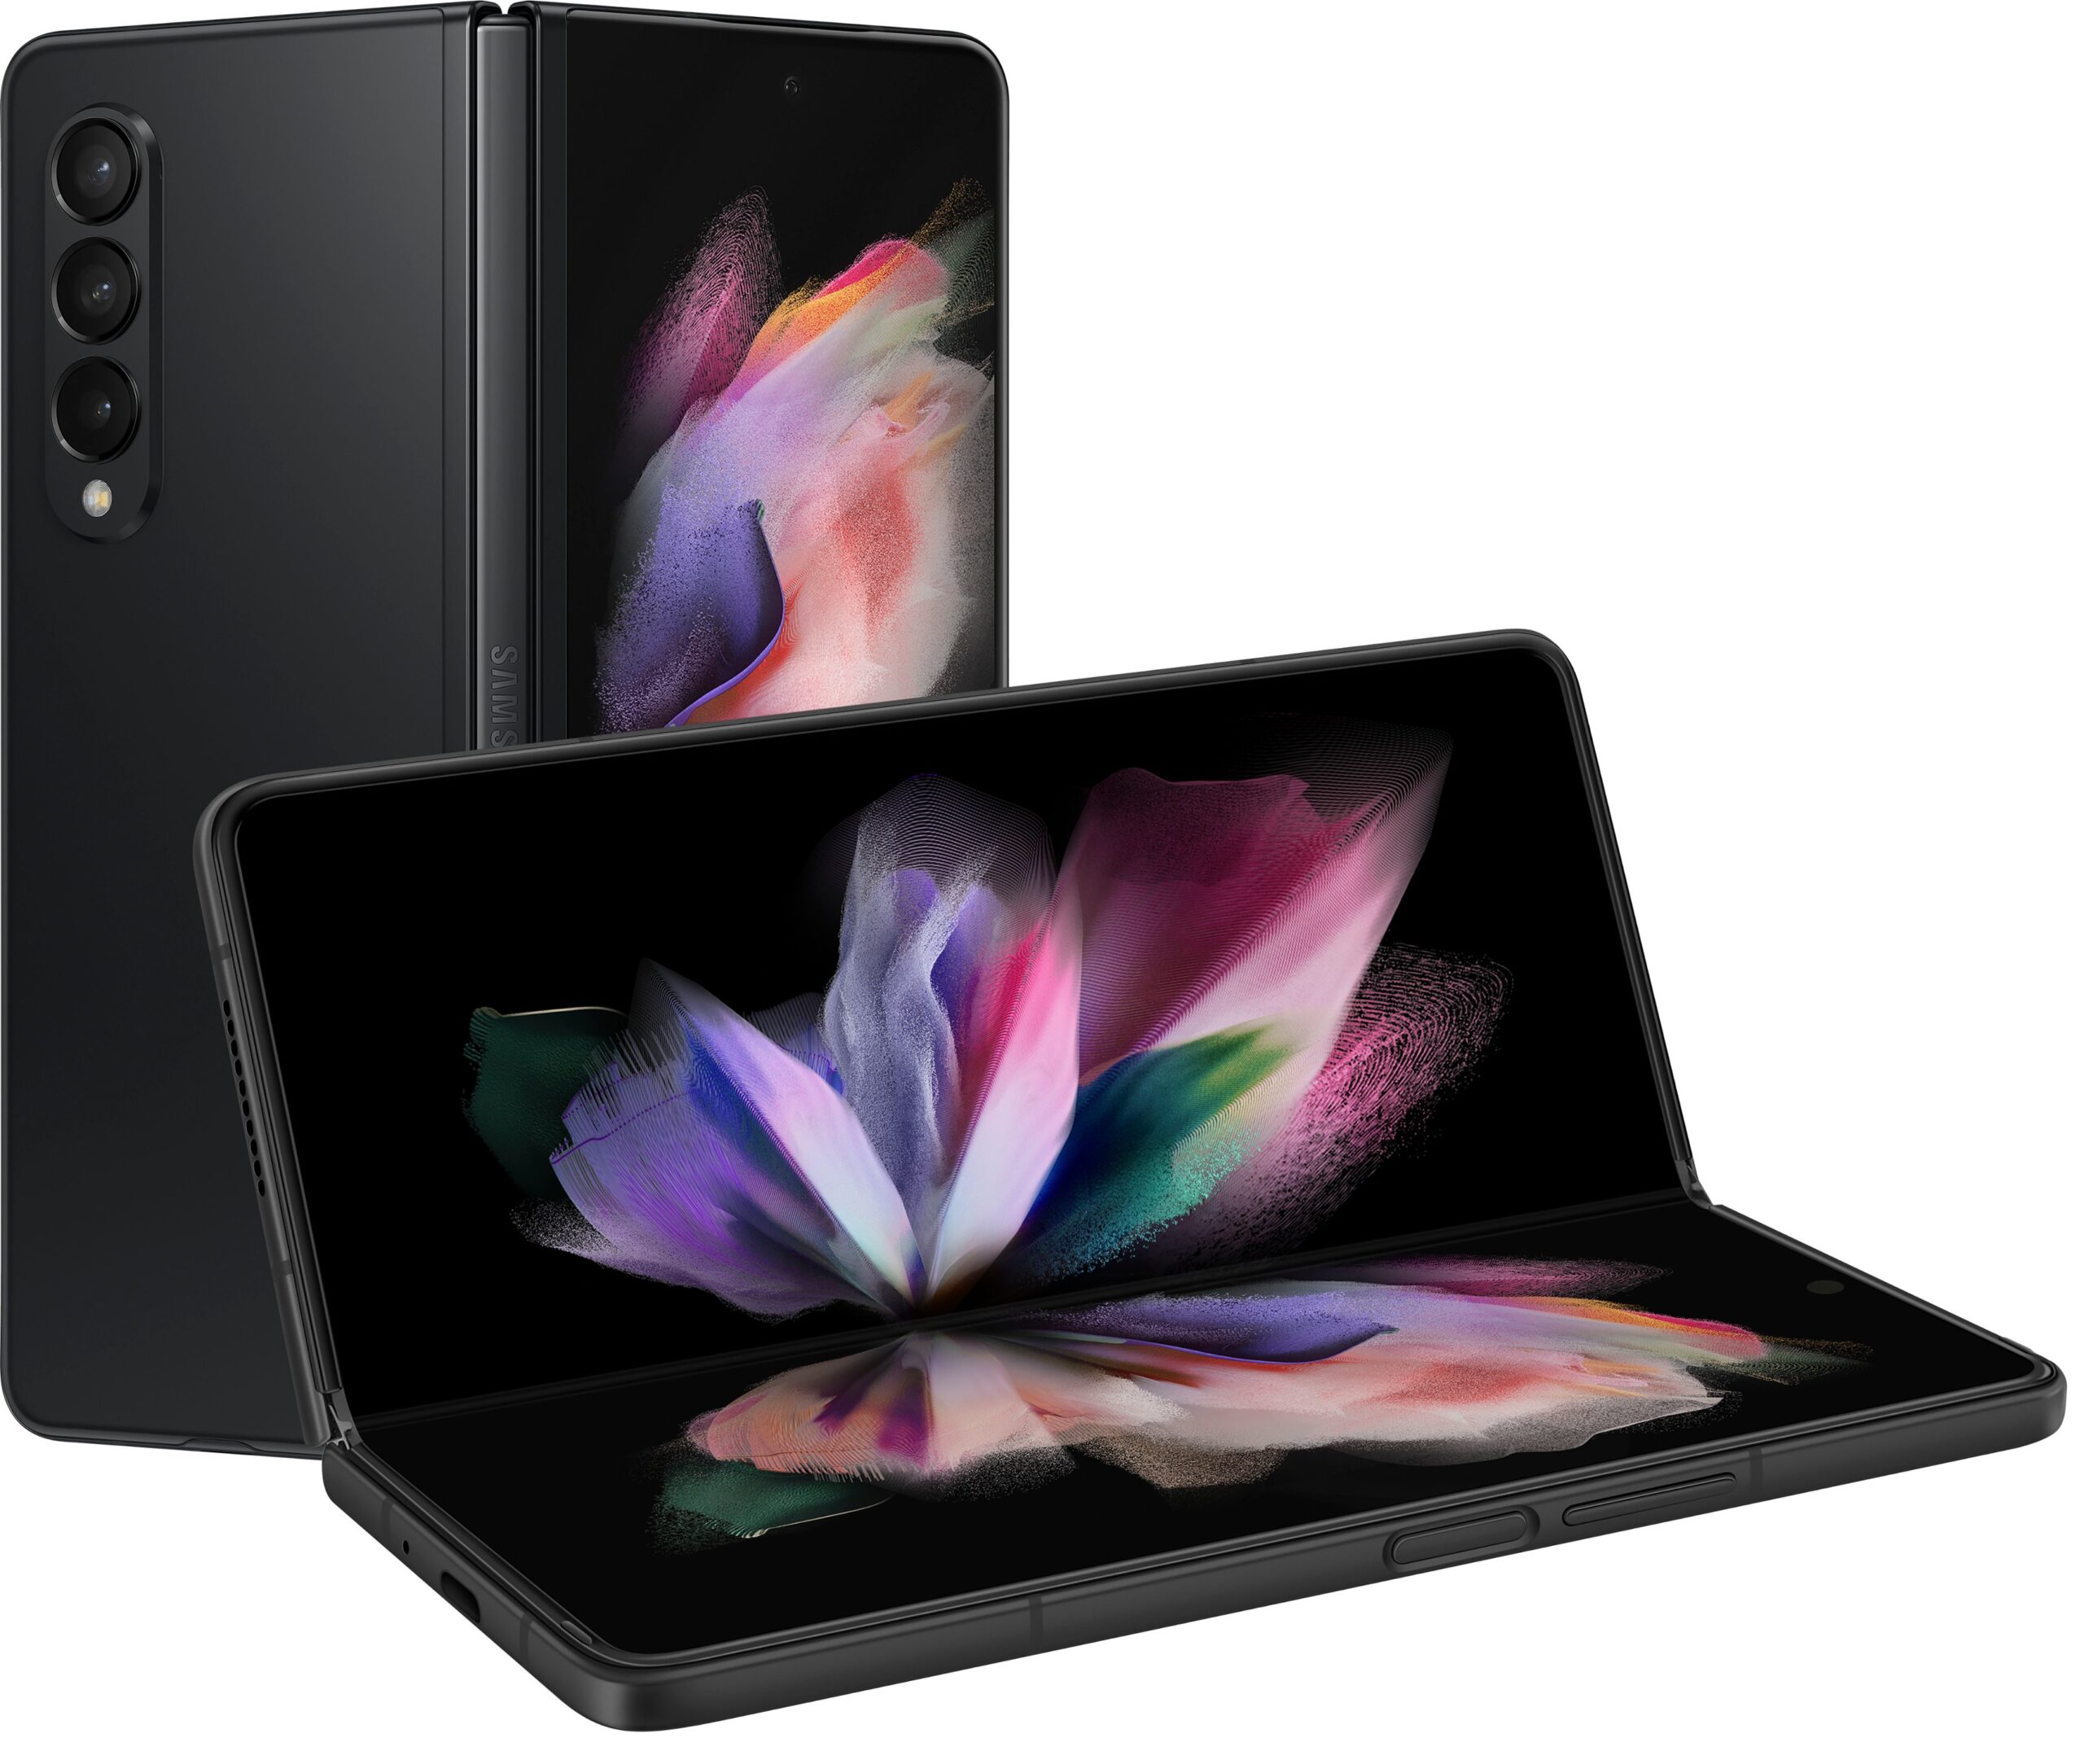 Samsung Galaxy Z Fold3 5G - Pictures